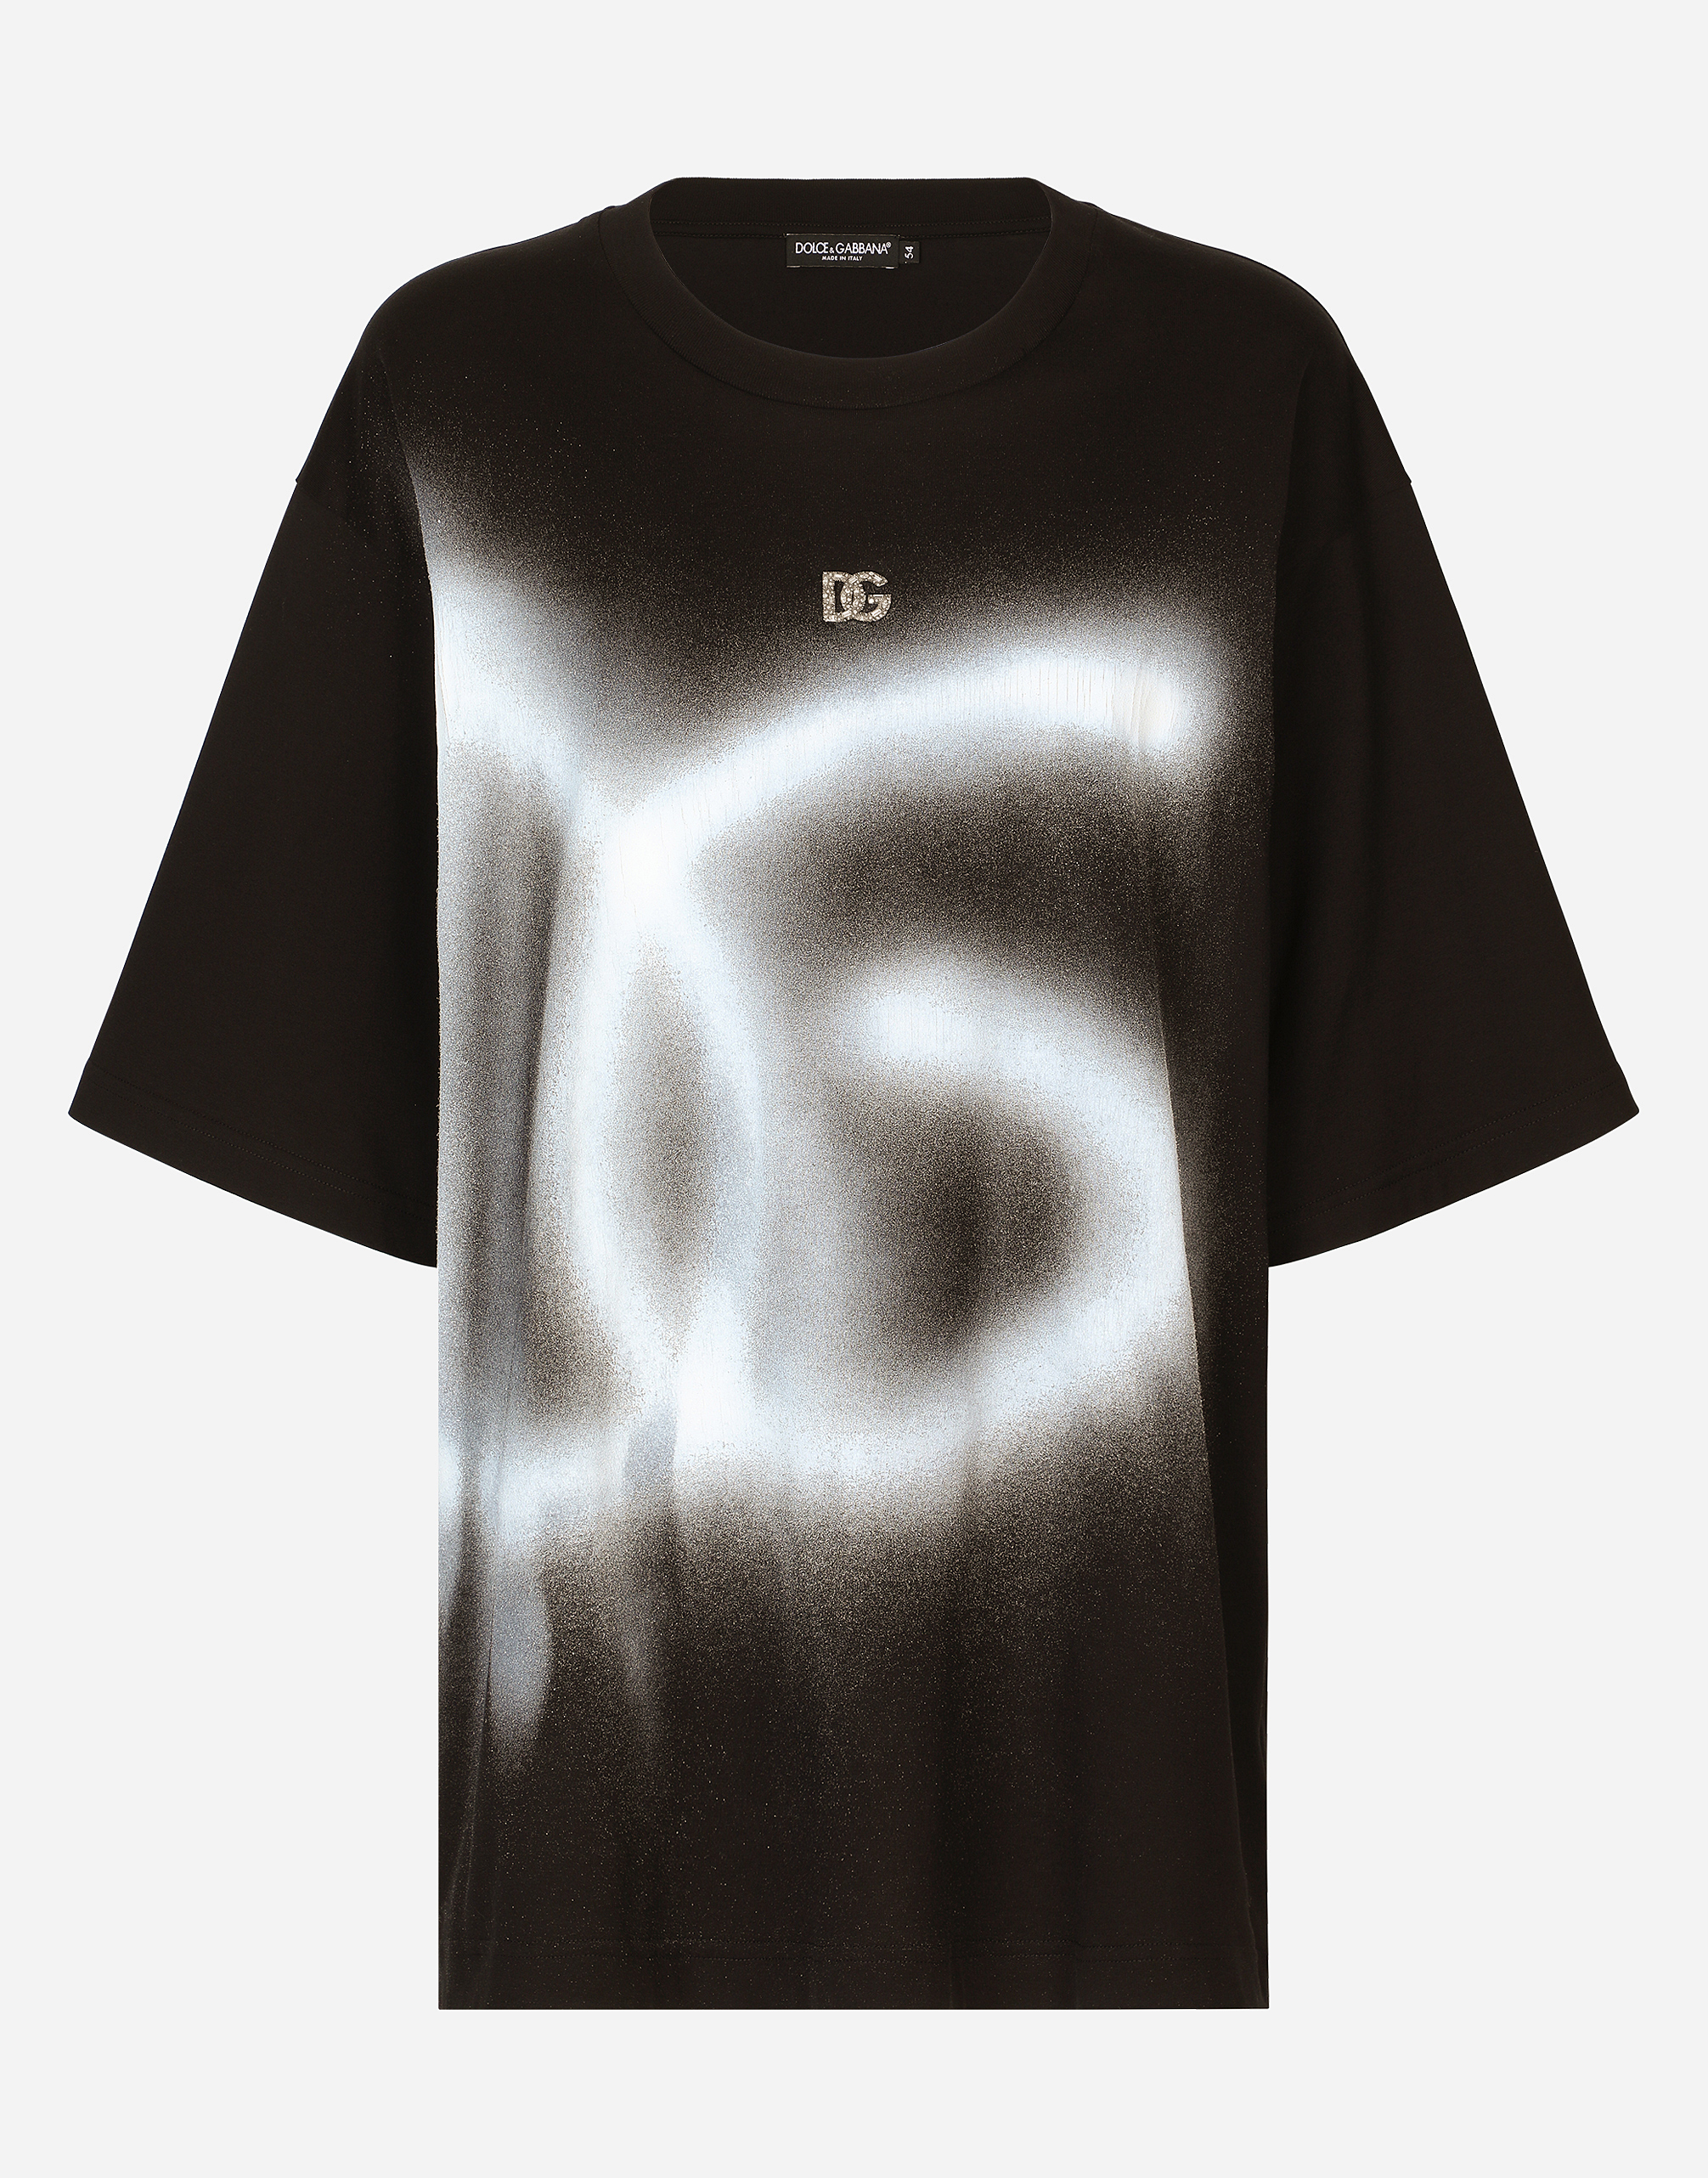 Oversize jersey T-shirt with DG logo print in Black